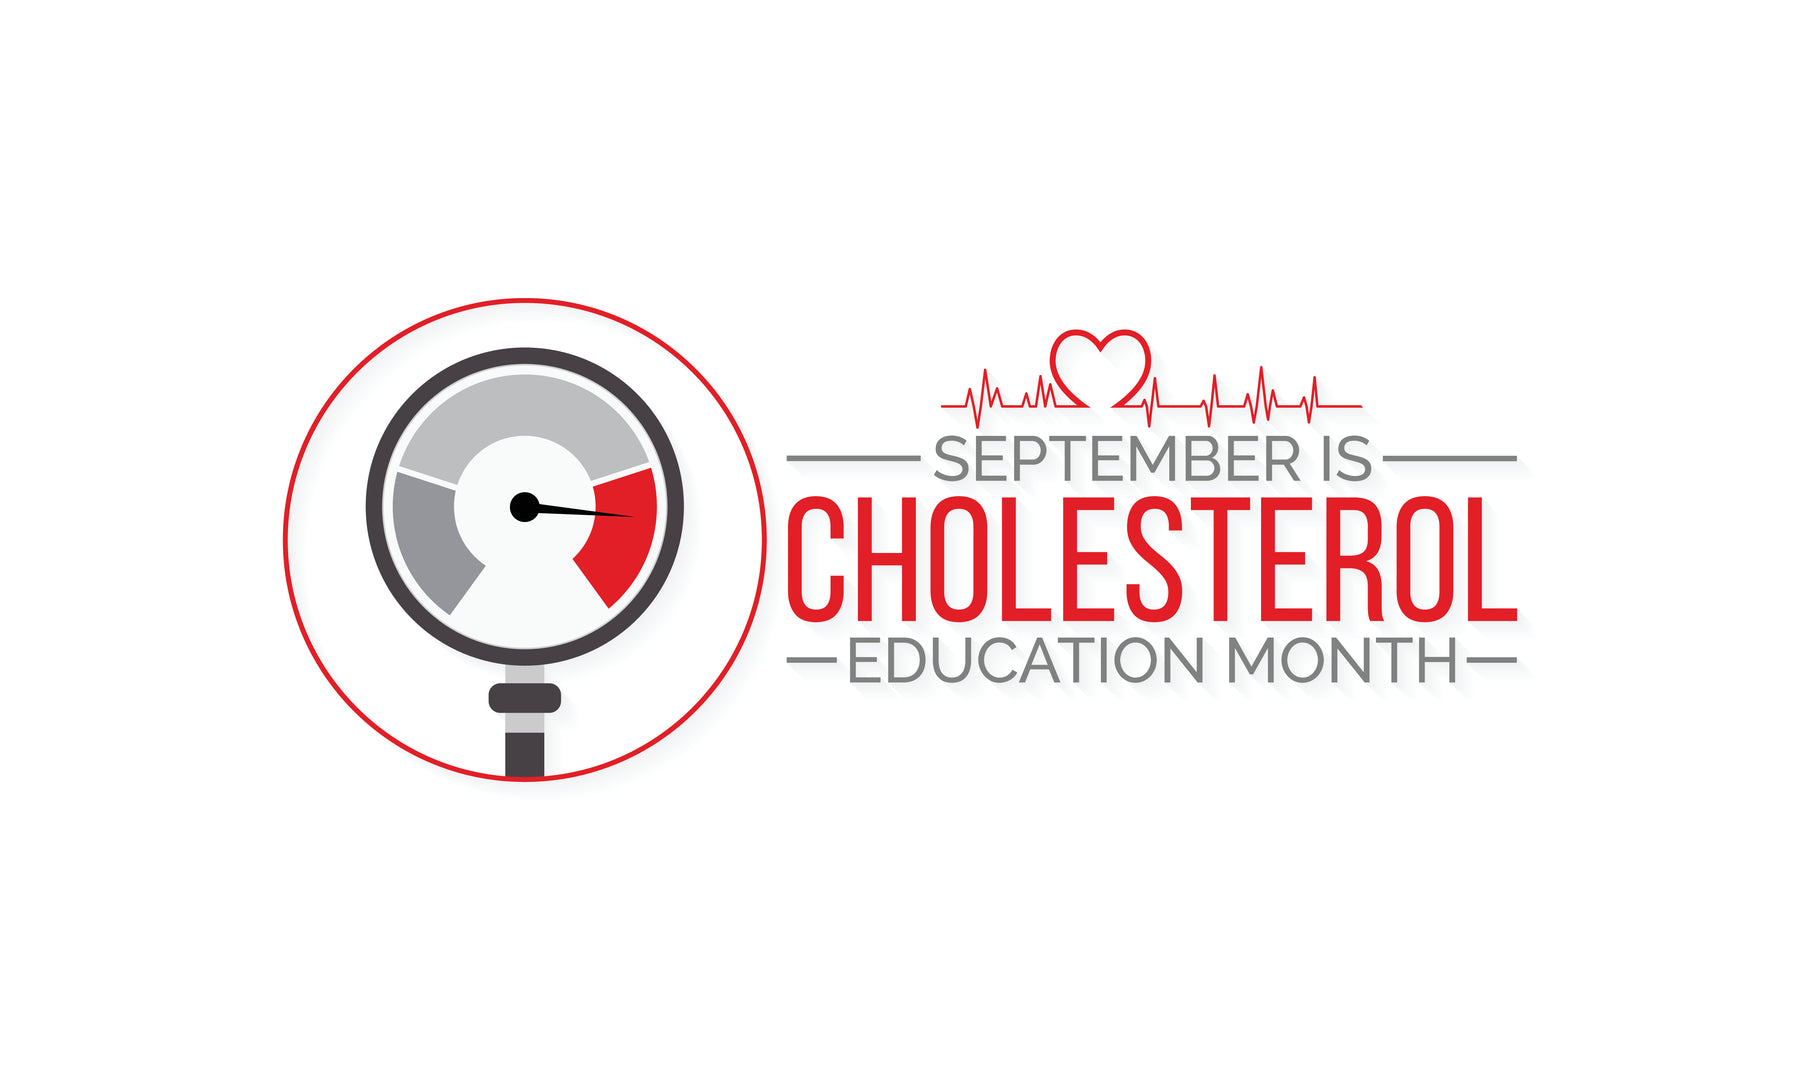 Cholesterol Education Month: Do You Know Your Cholesterol?